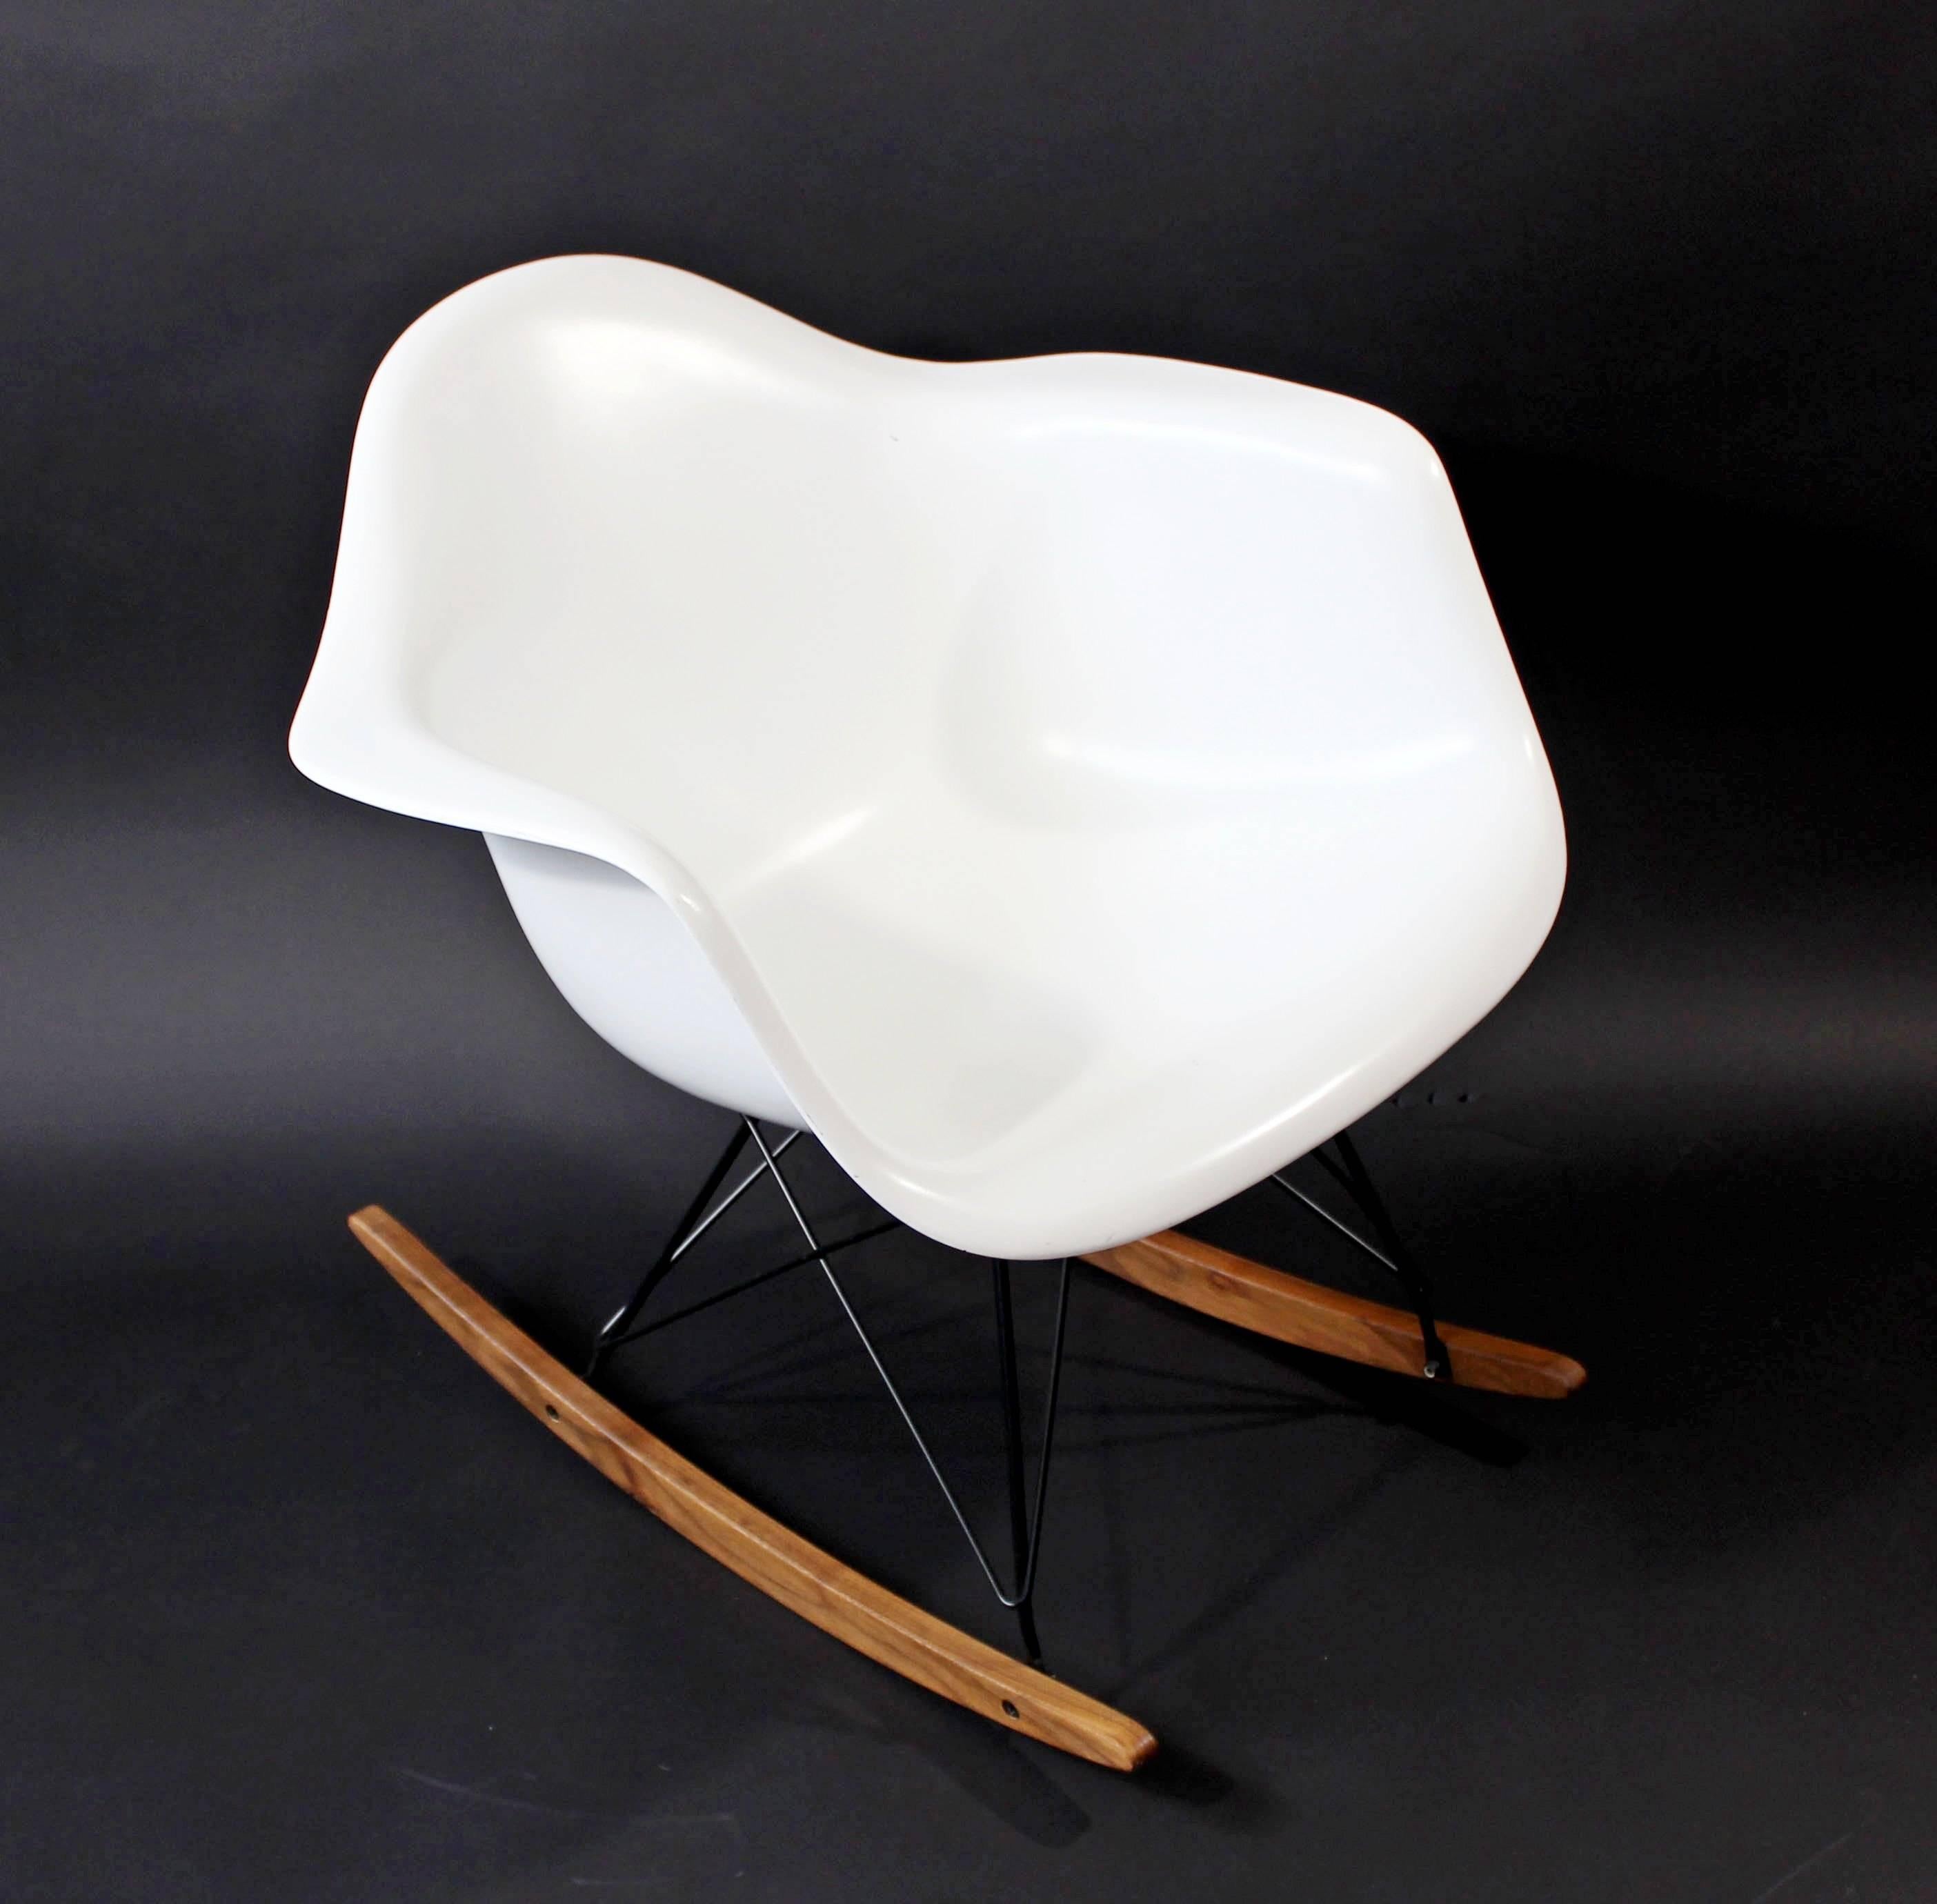 For your consideration is a vintage 1970s, Eames for Herman Miller, rocking chair with a recently painted white, fiberglass seat. In excellent condition. The dimensions are 25